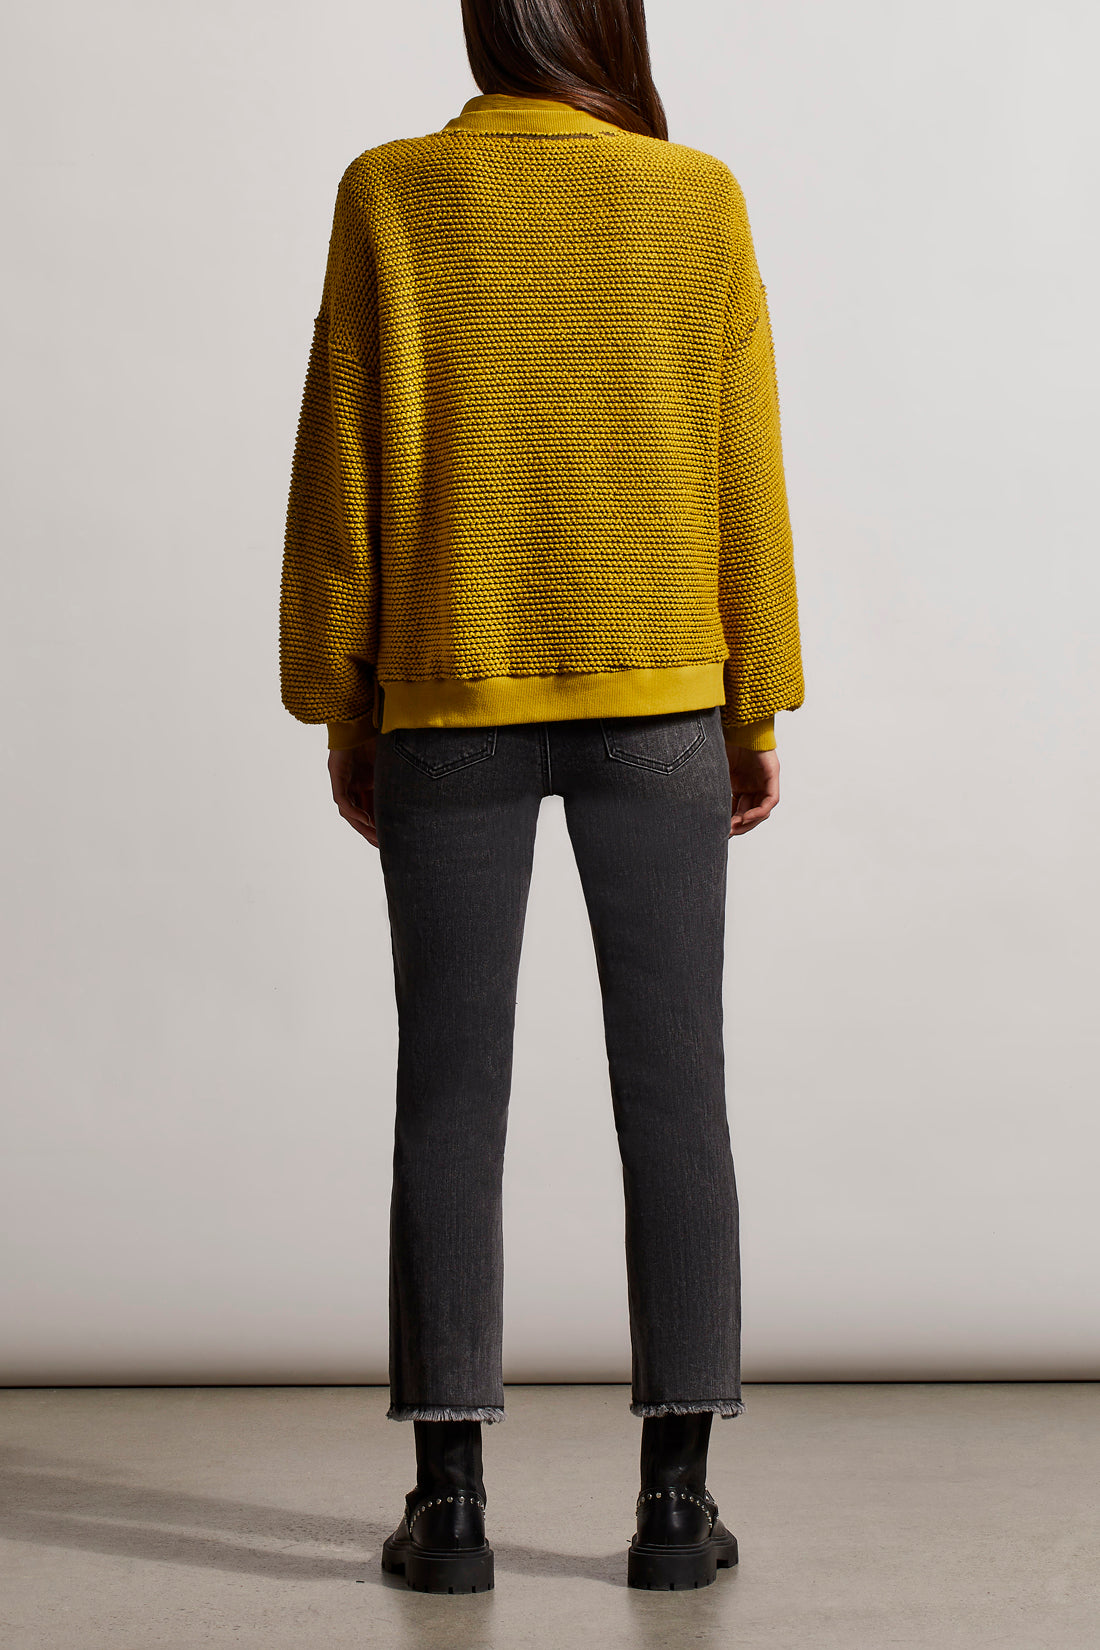 Chartreuse Crew Neck Sweater